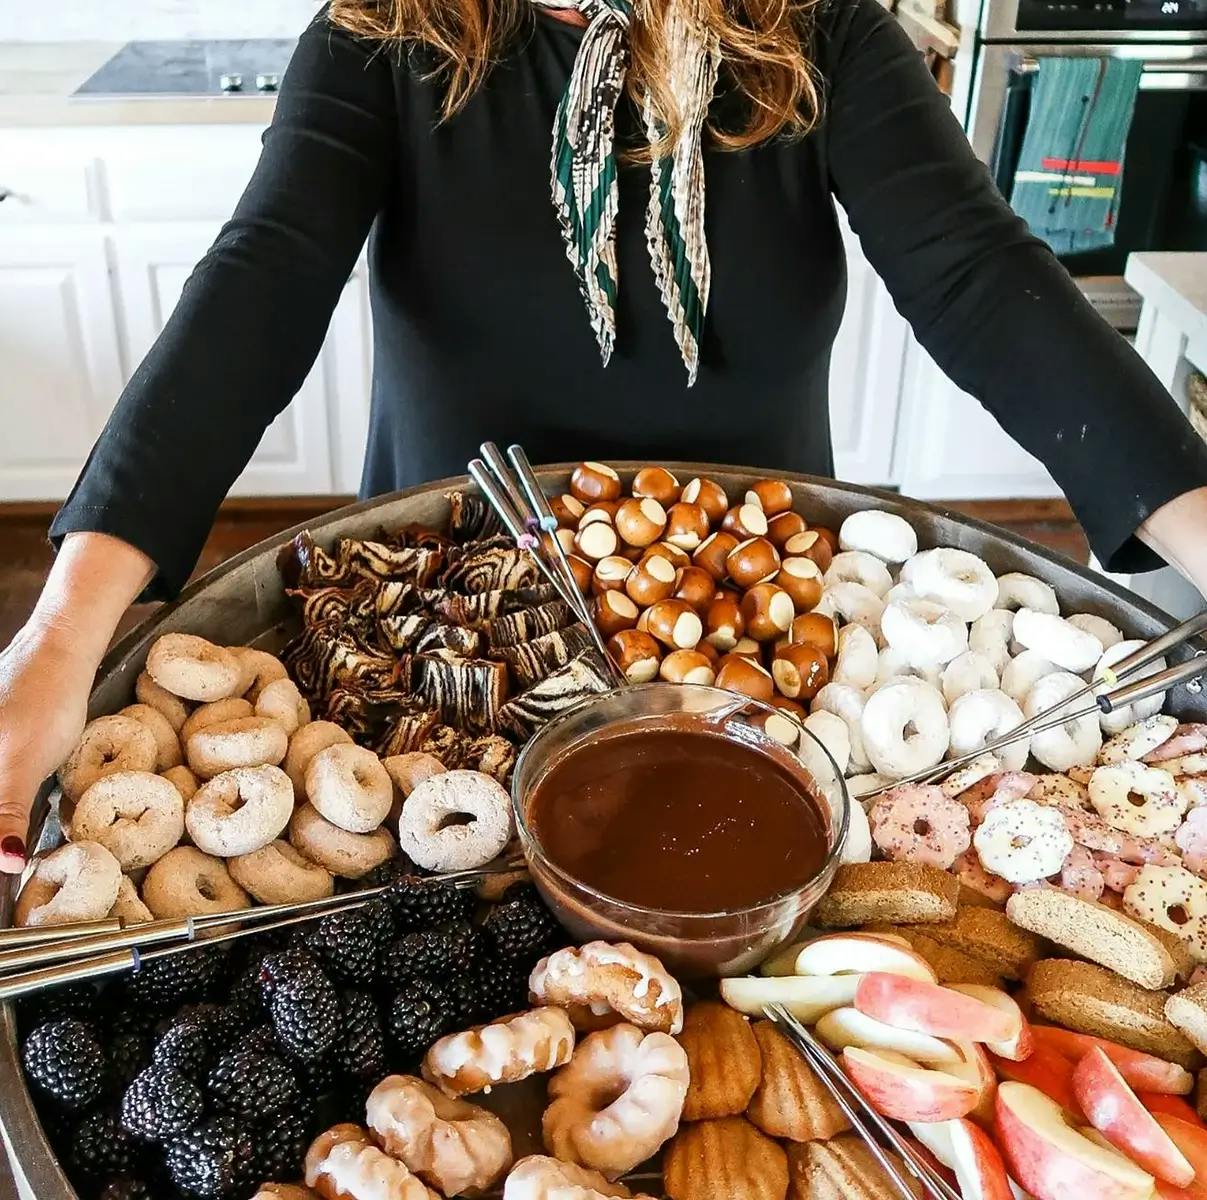 A Christmas dessert charcuterie board containing Nutella fondant dip with fruit, donuts, biscotti, and pretzels for dipping.